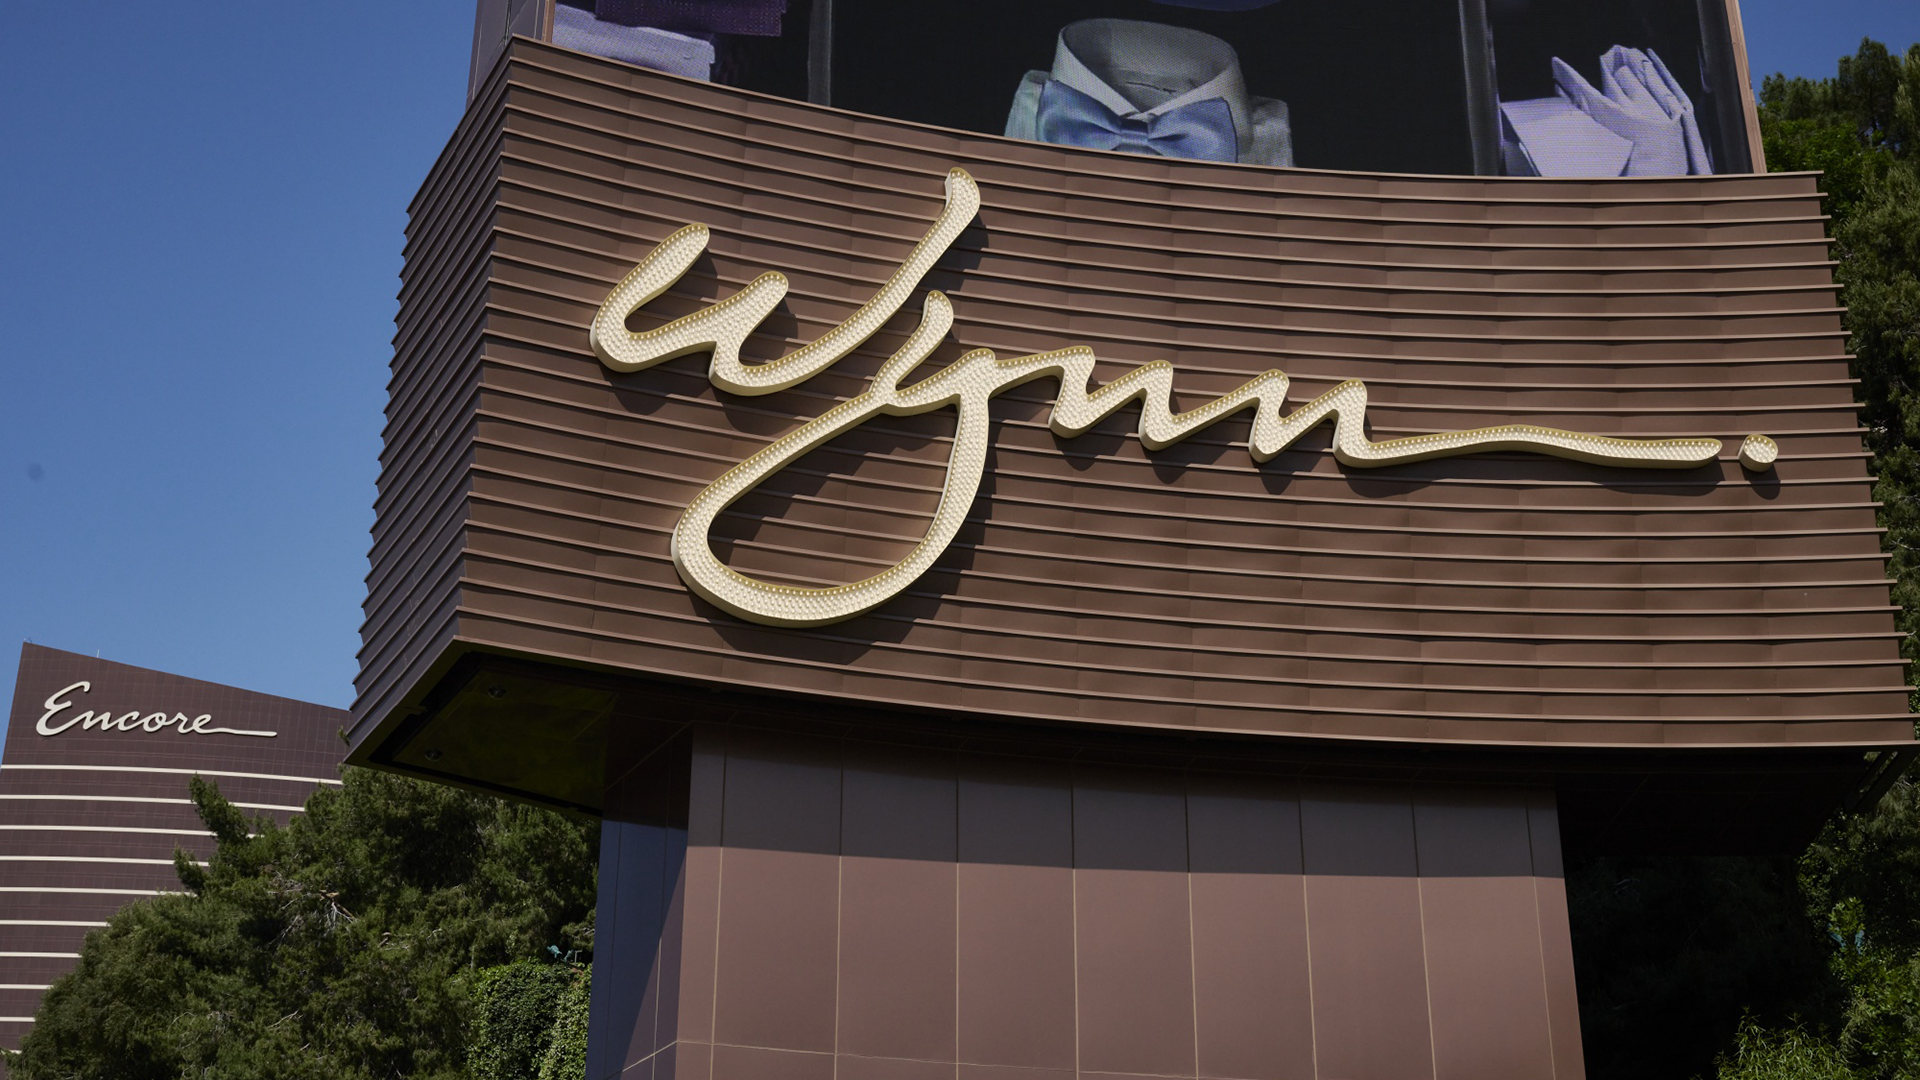 Wynn Resorts Shuts Down iGaming and Sports Betting